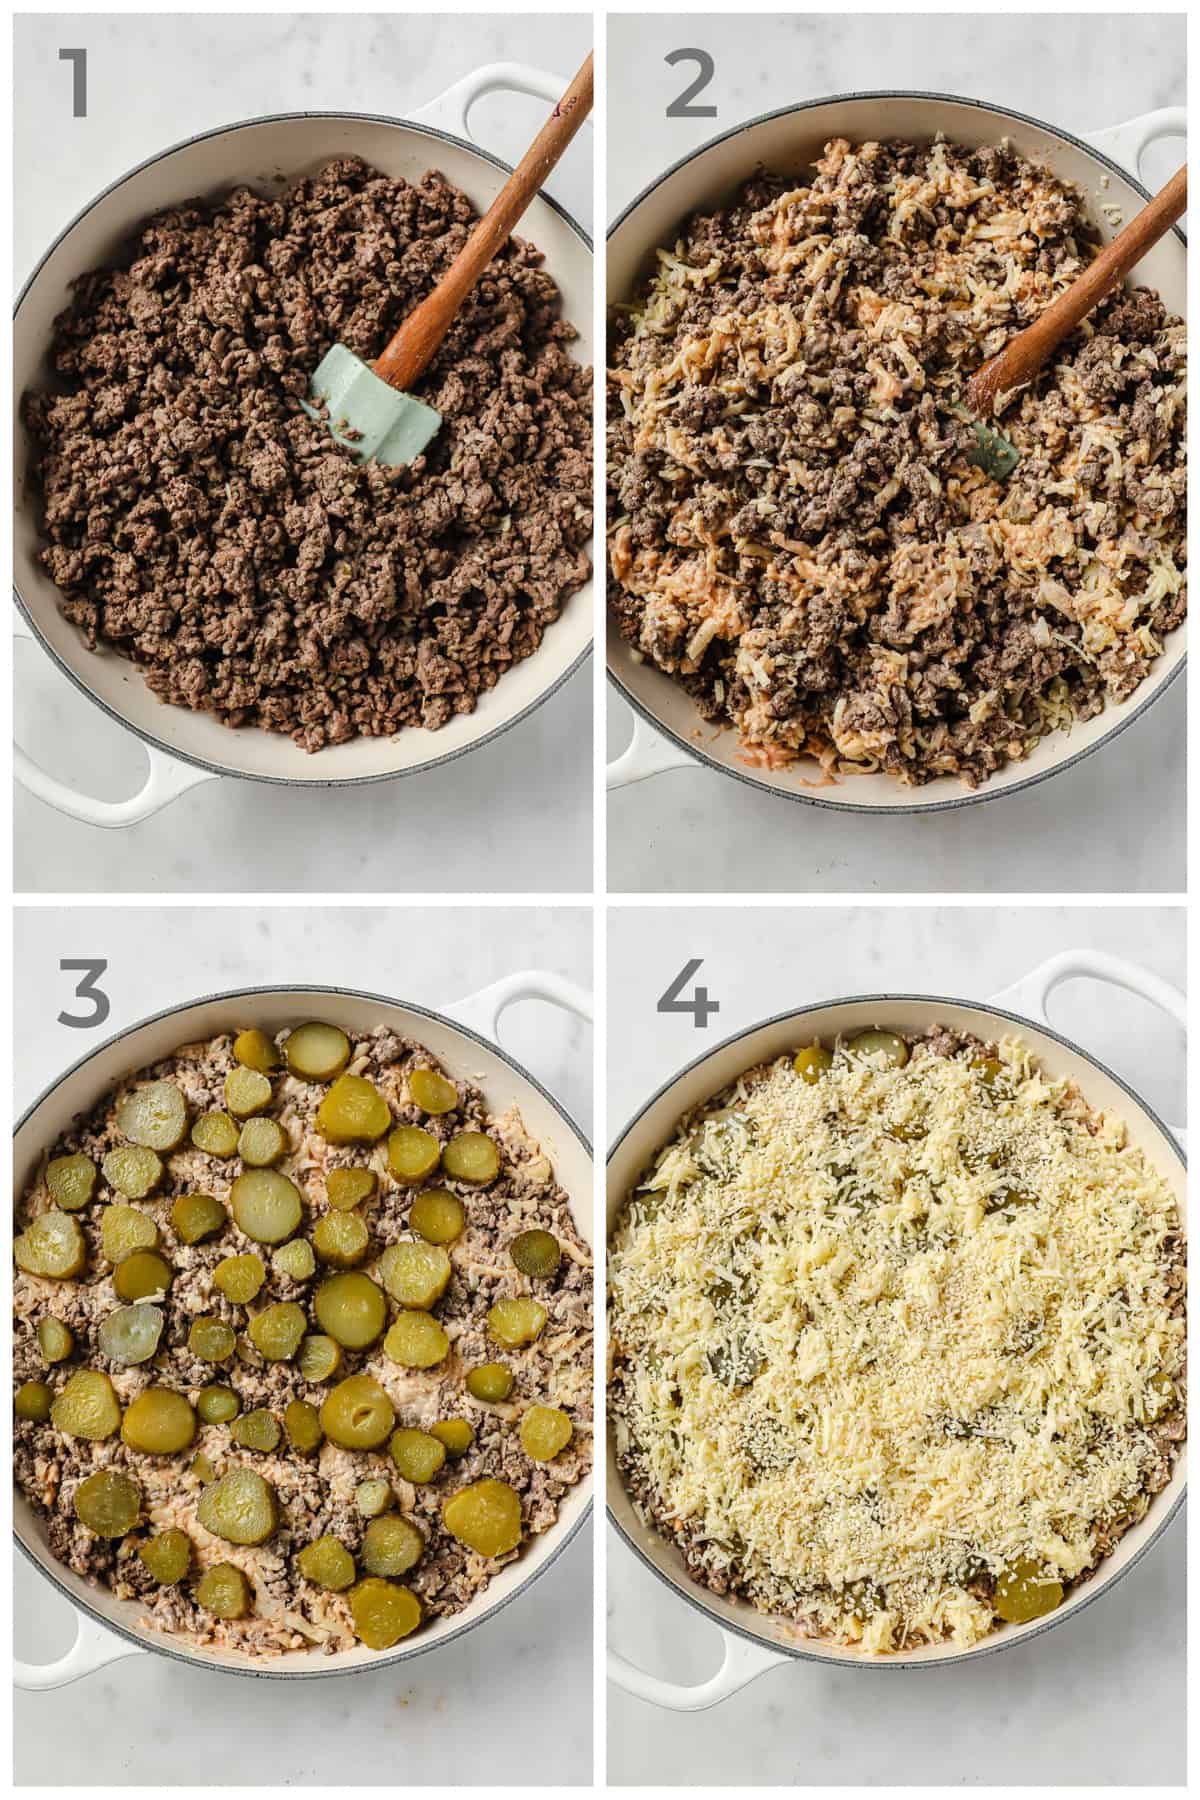 4 photos - step by step instructions on how to make a low carb casserole